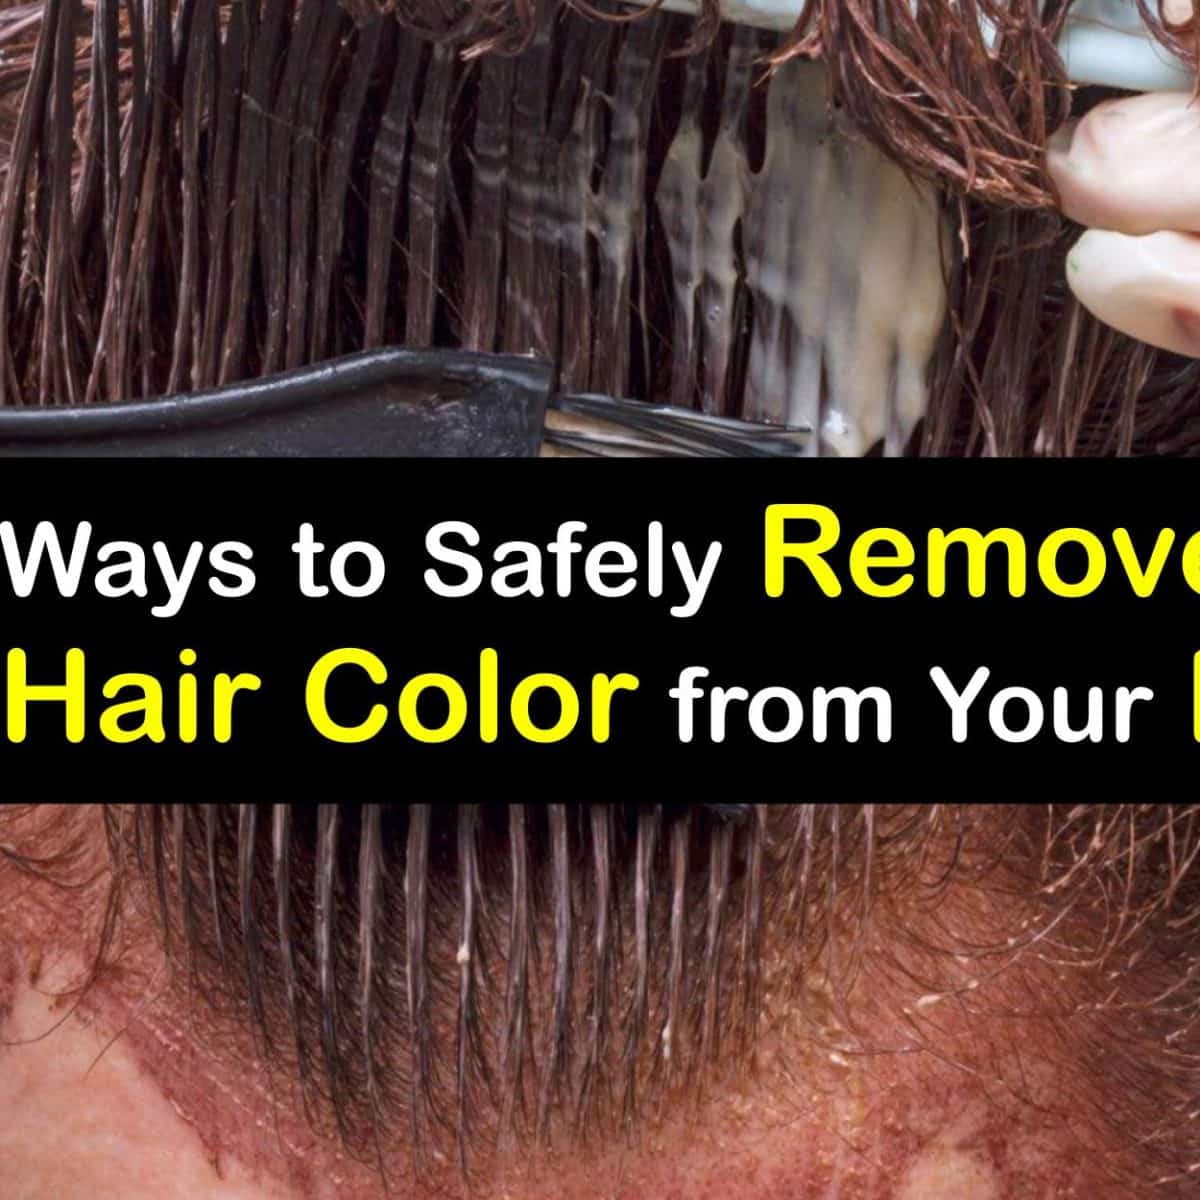 Getting Rid of Hair Color on Your Face - Smart Removal Tips